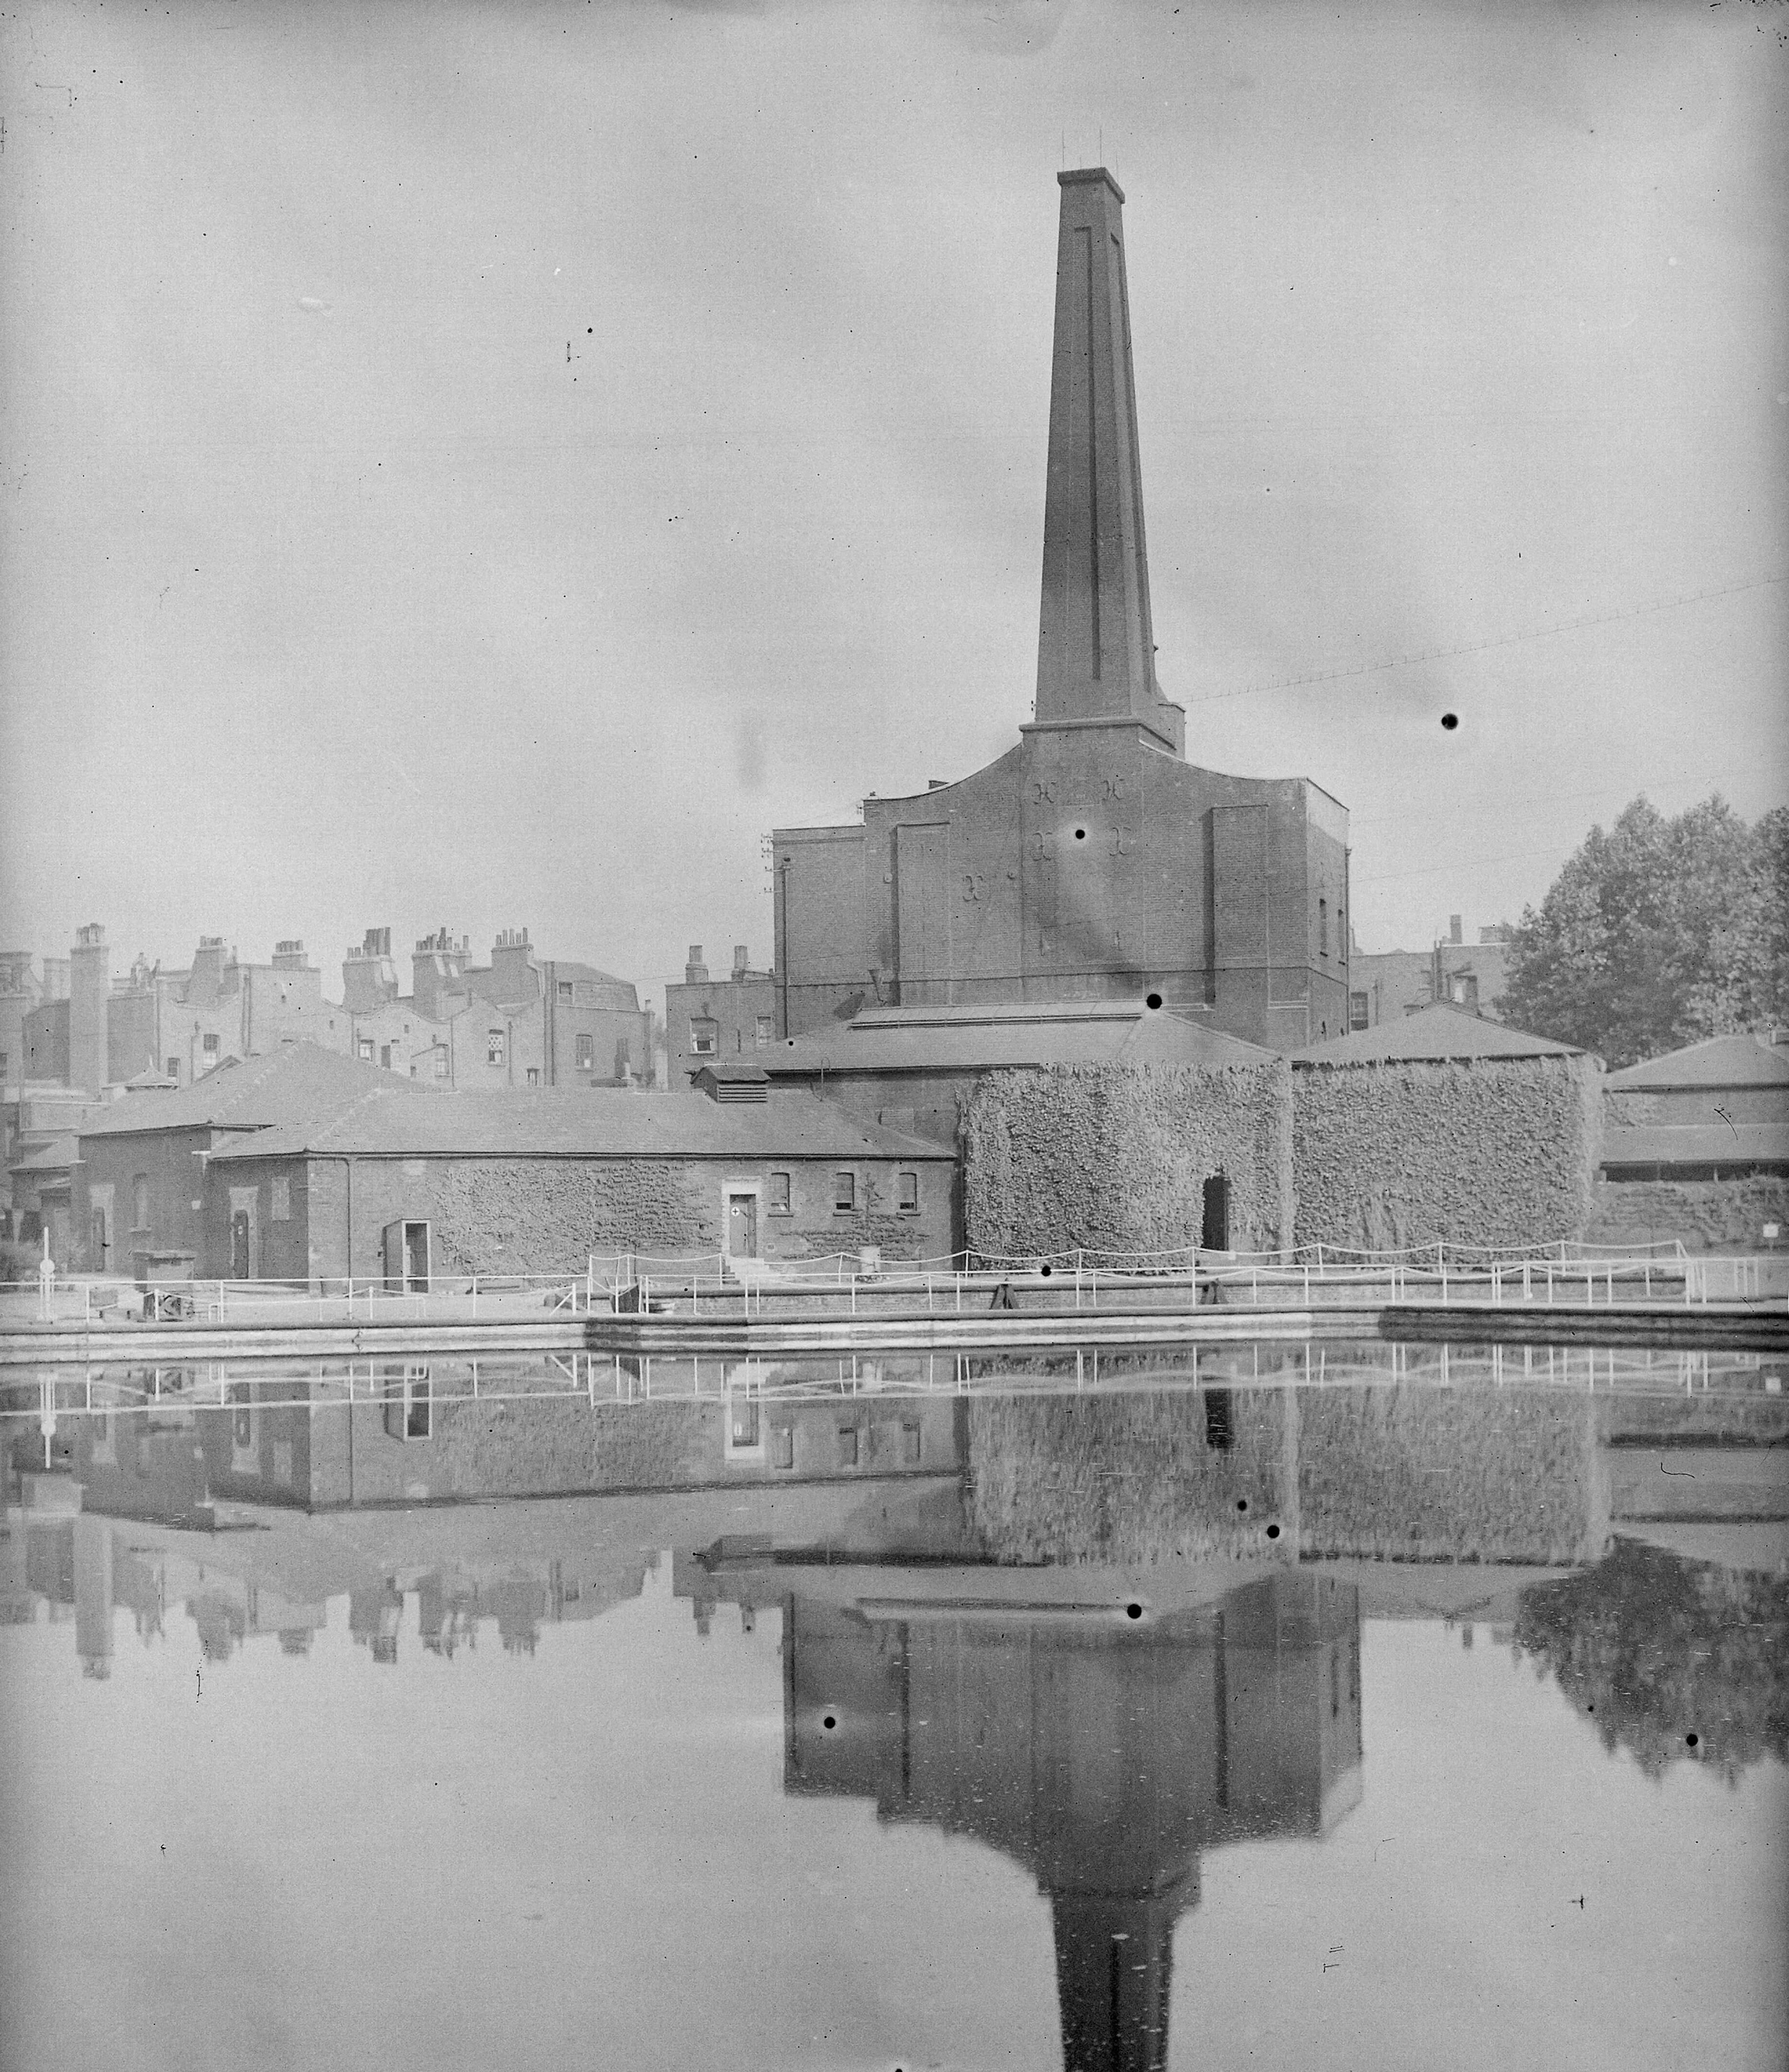 Photograph of industrial brick building with a tall chimney next to a reservoir